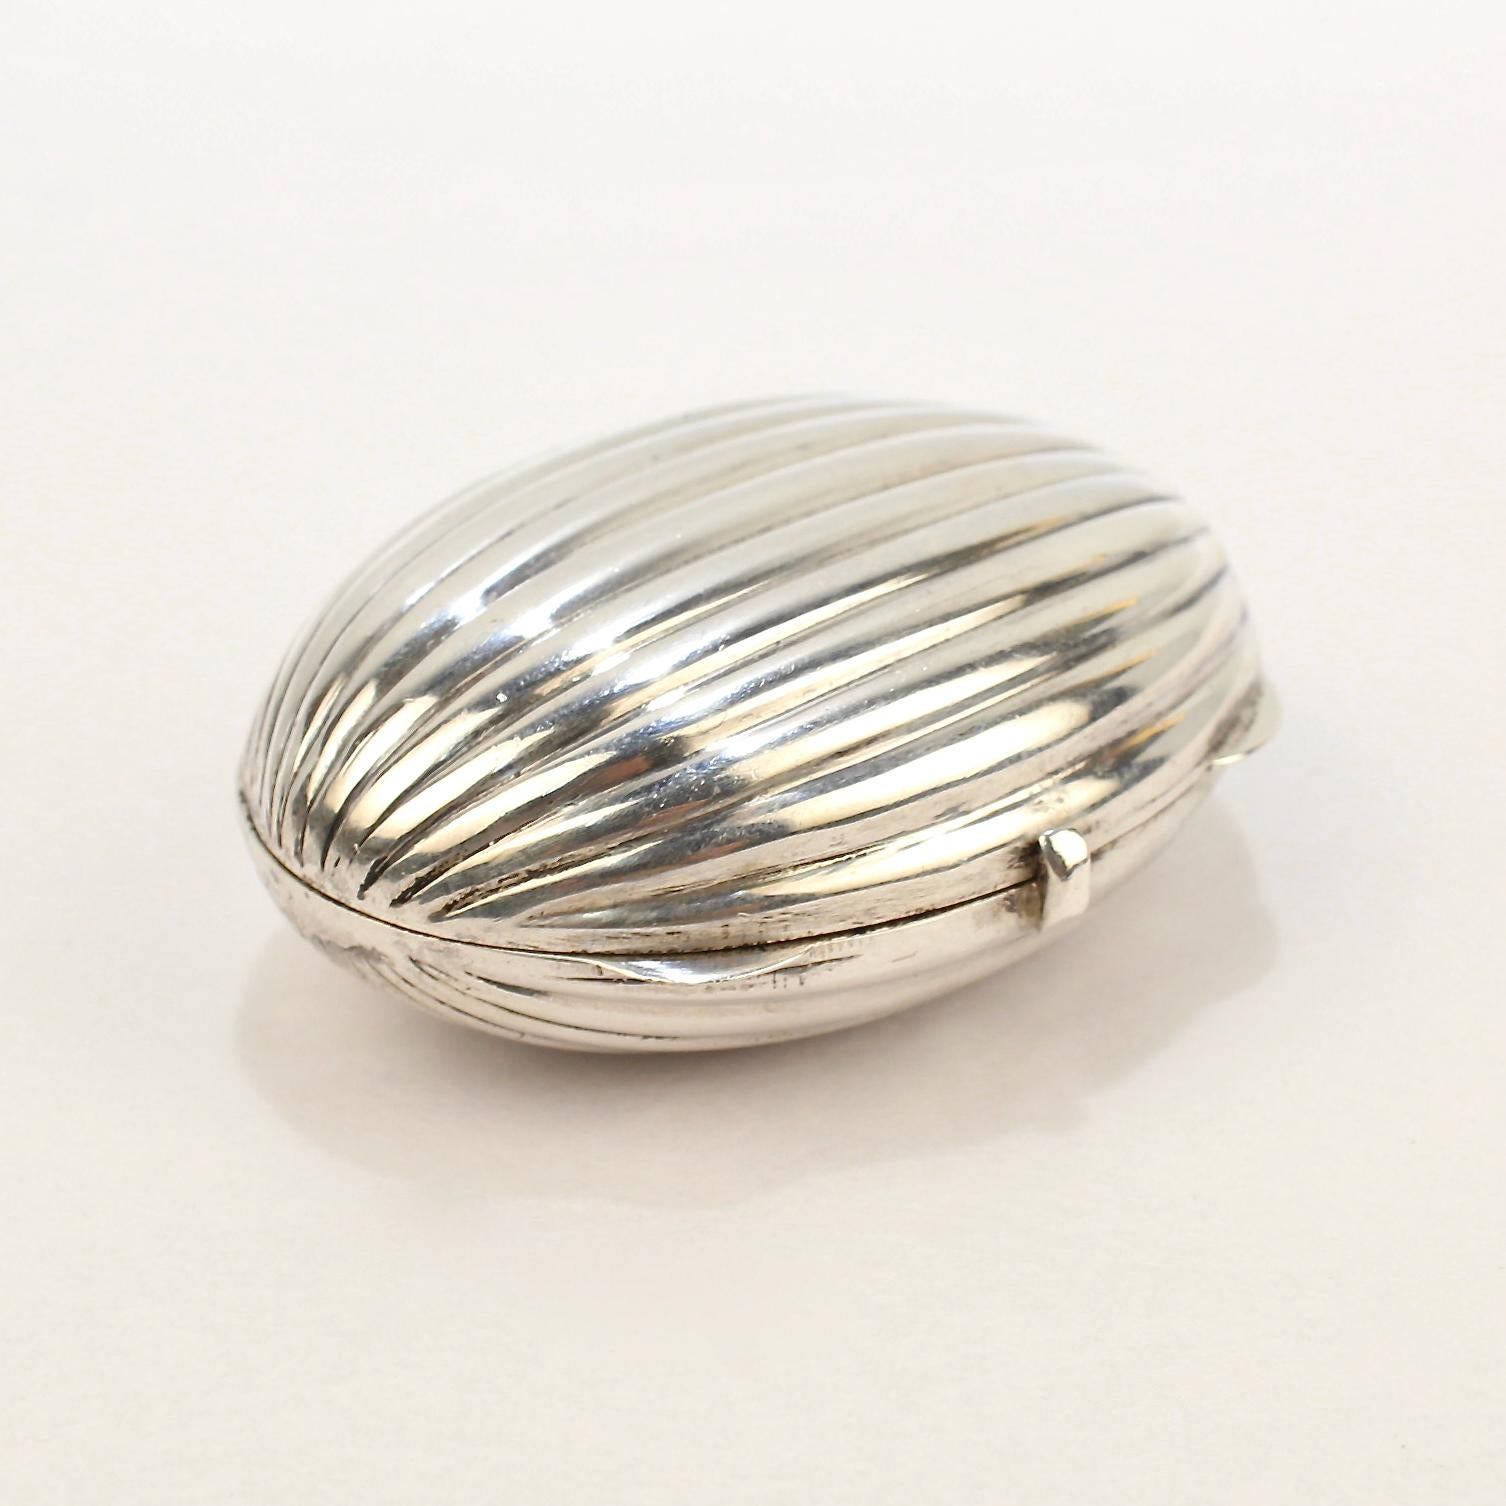 A very fine Tiffany & Co. oval pill box.

In sterling silver with melon-type ribs to the top and bottom.

Provenance: 
From the collection of the legendary interior decorator - Mario Buatta.

Date:
20th Century

Overall Condition:
It is in overall